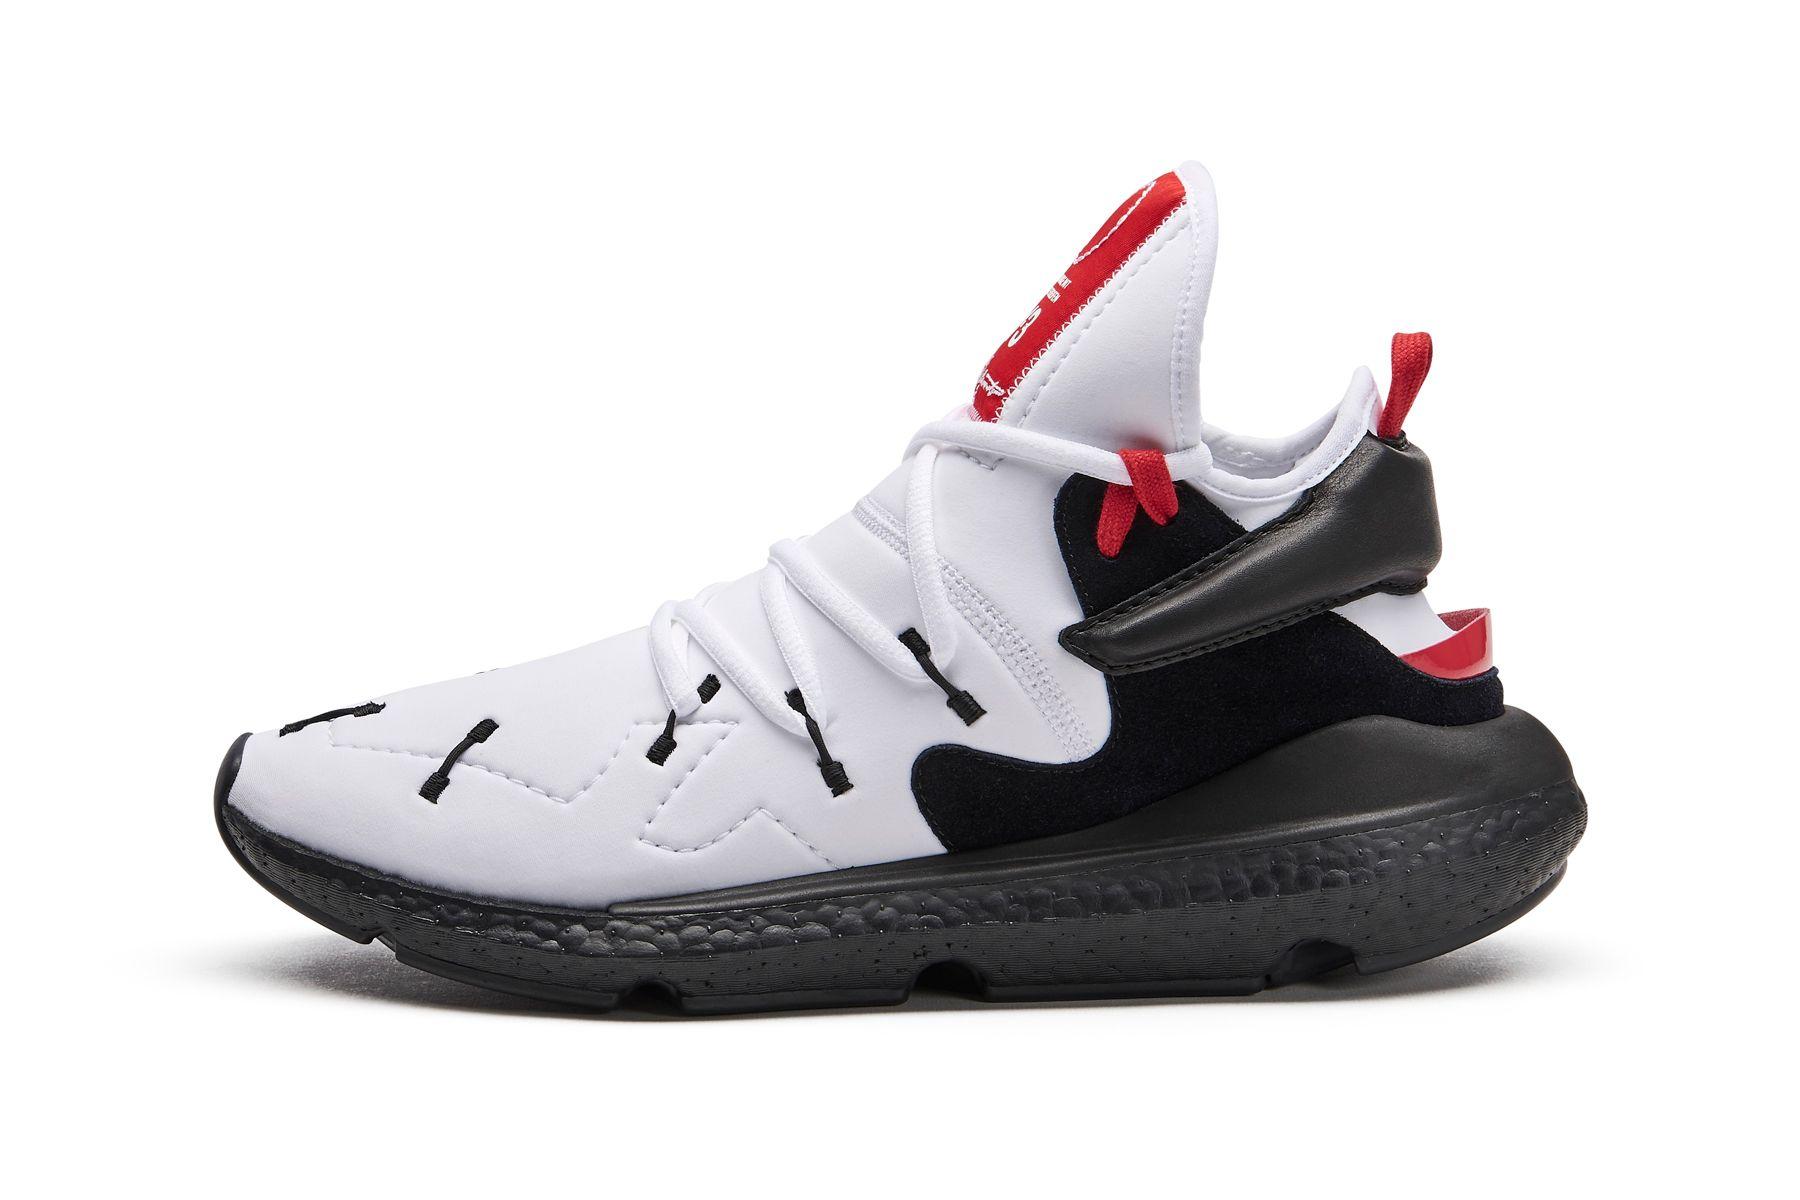 White and Red Y Logo - Y 3 Drops Kusari II Model For Fall Winter 2018